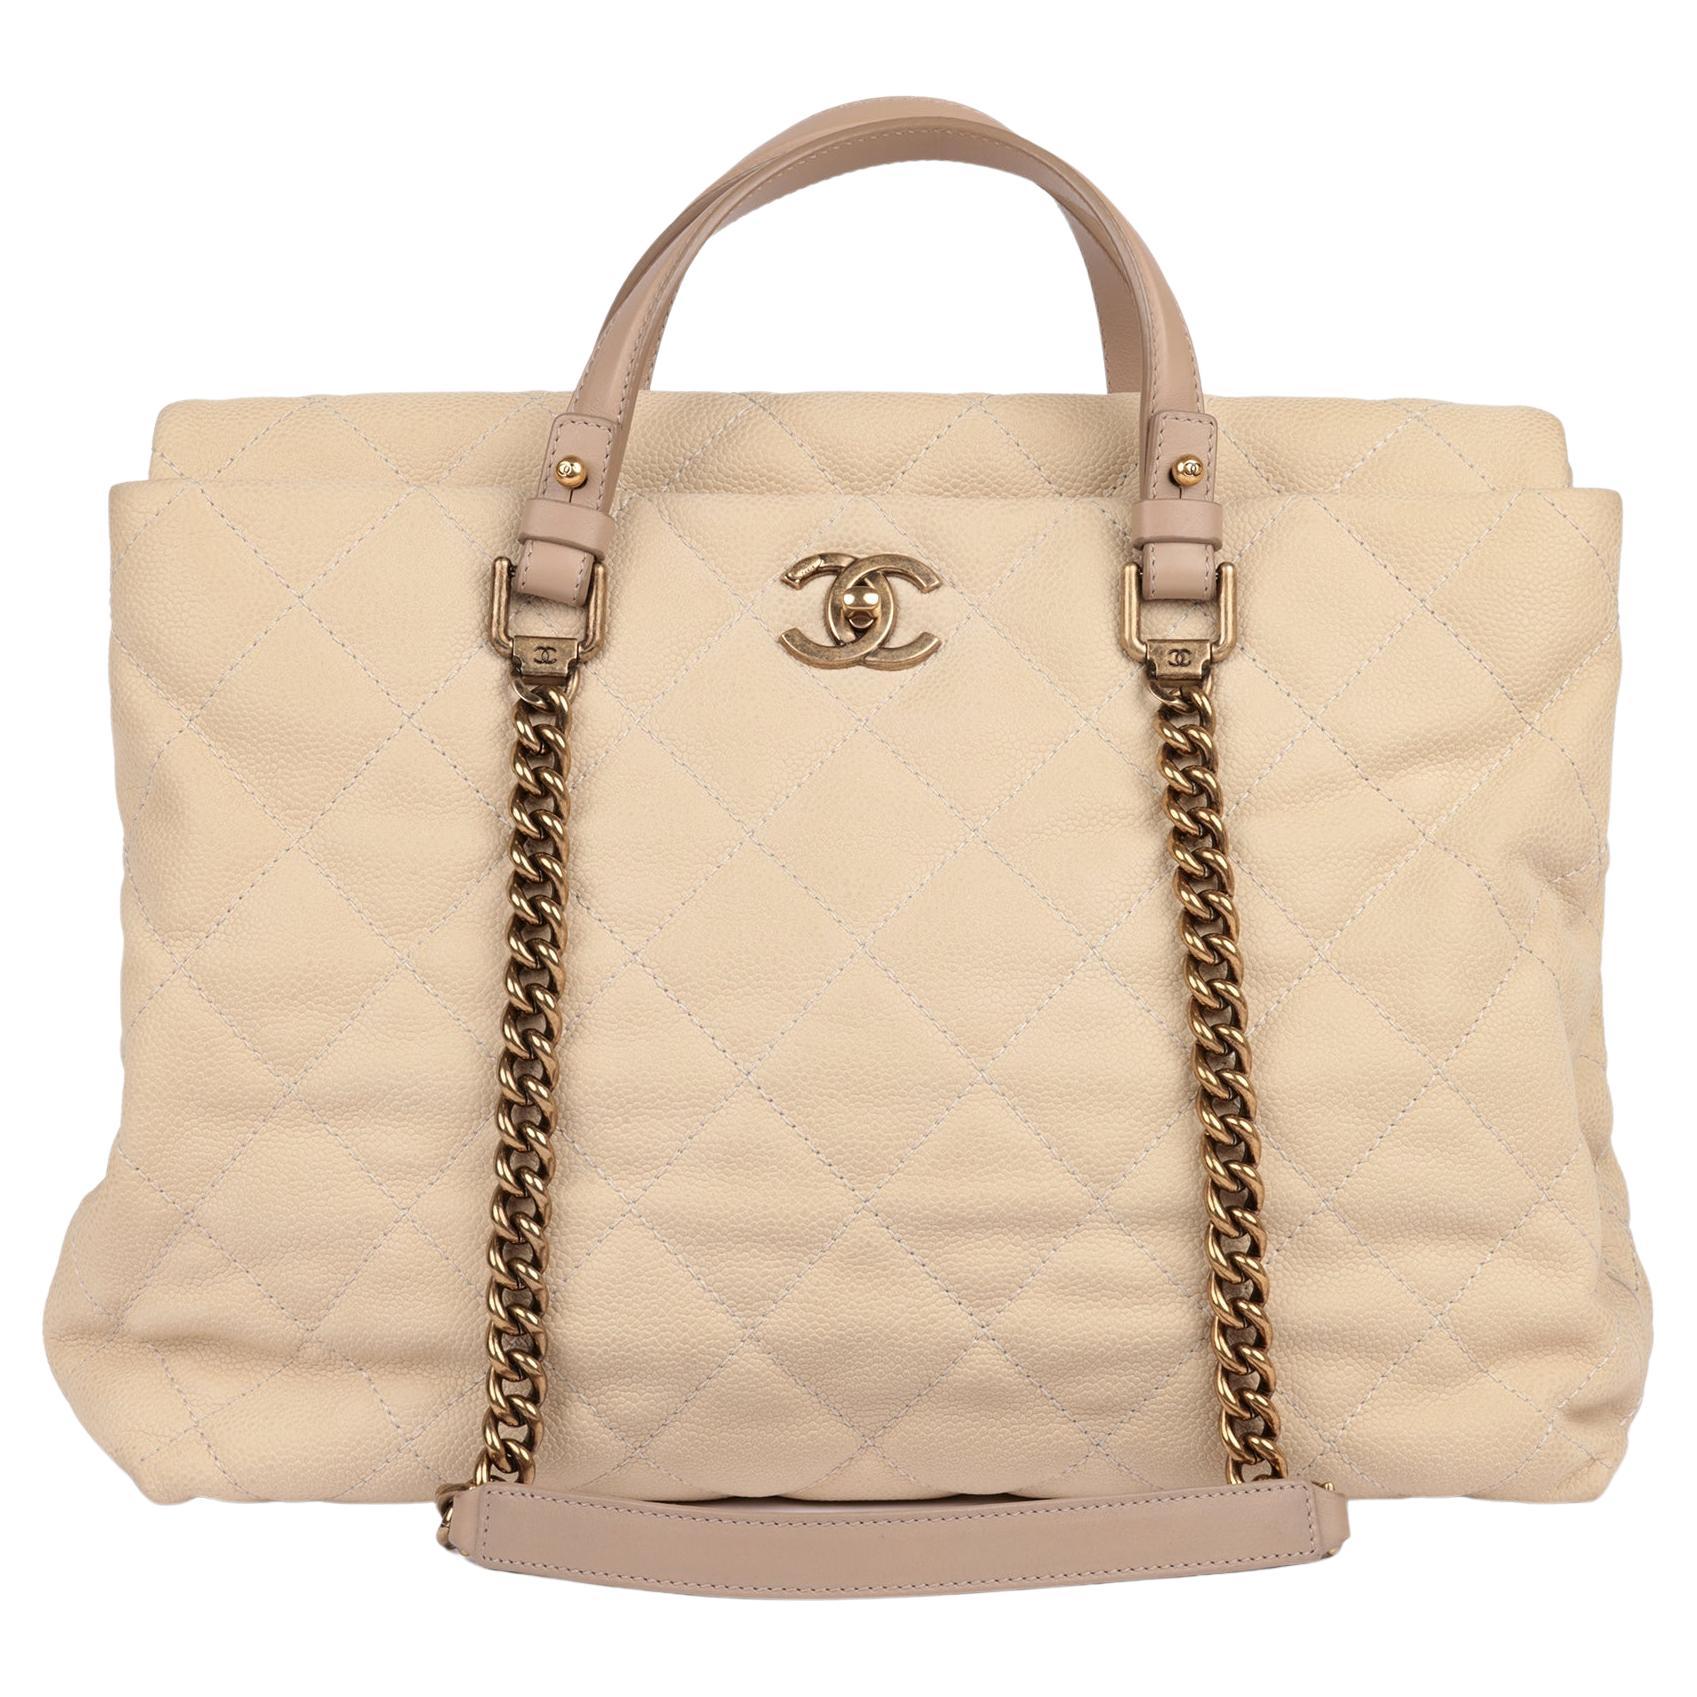 Chanel Beige Quilted Caviar Leather Large Portobello Shoulder Tote